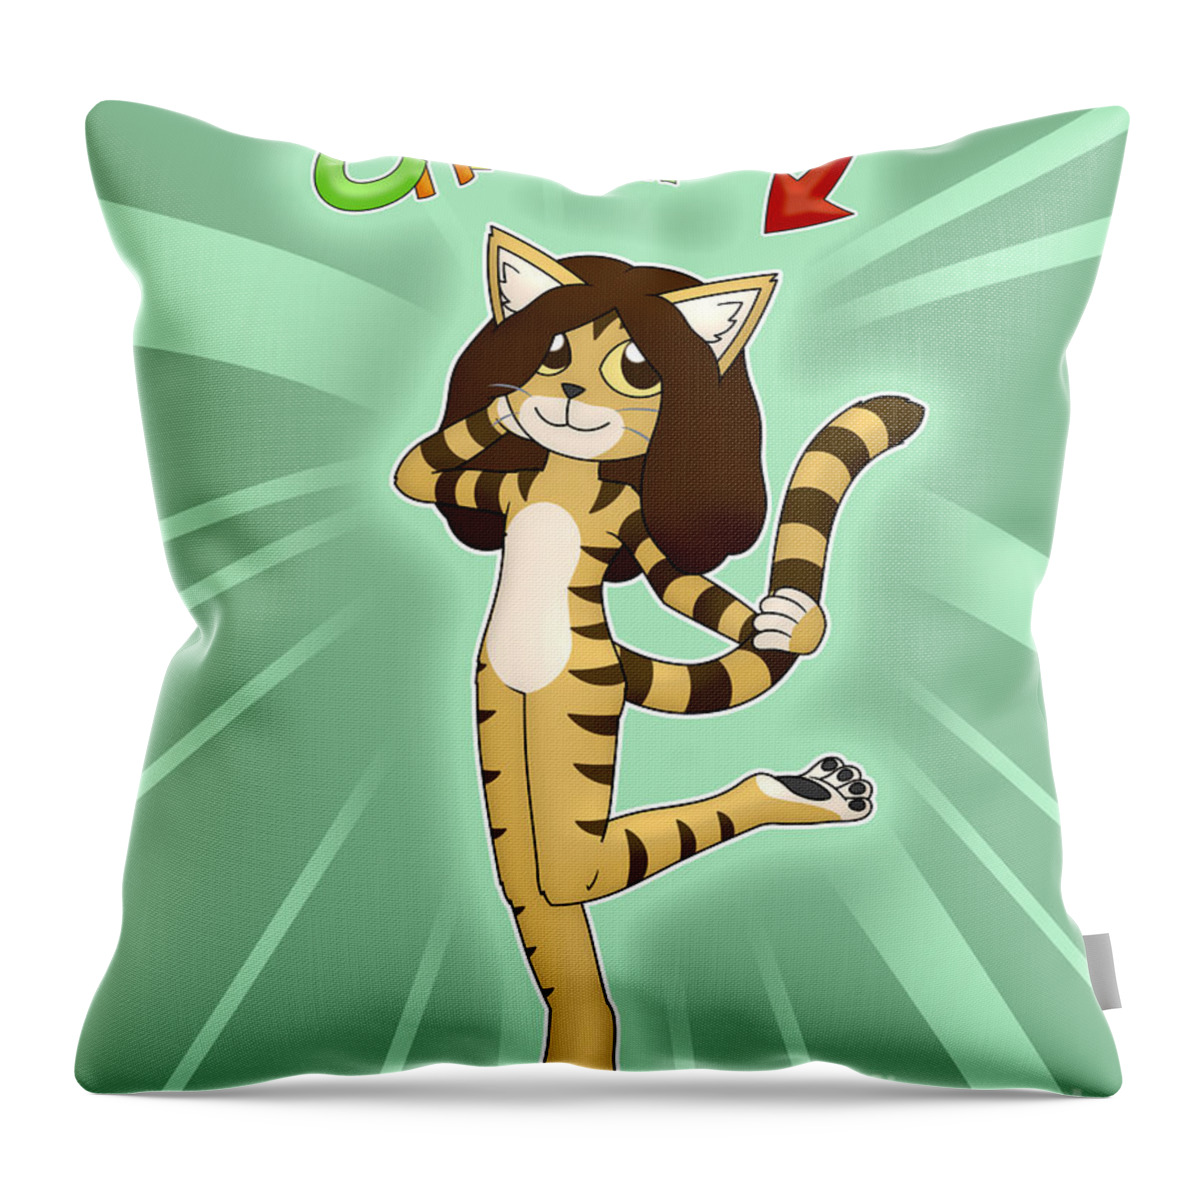 Cat Throw Pillow featuring the digital art Look At Me, I'm Chi-Chi by Jayson Halberstadt